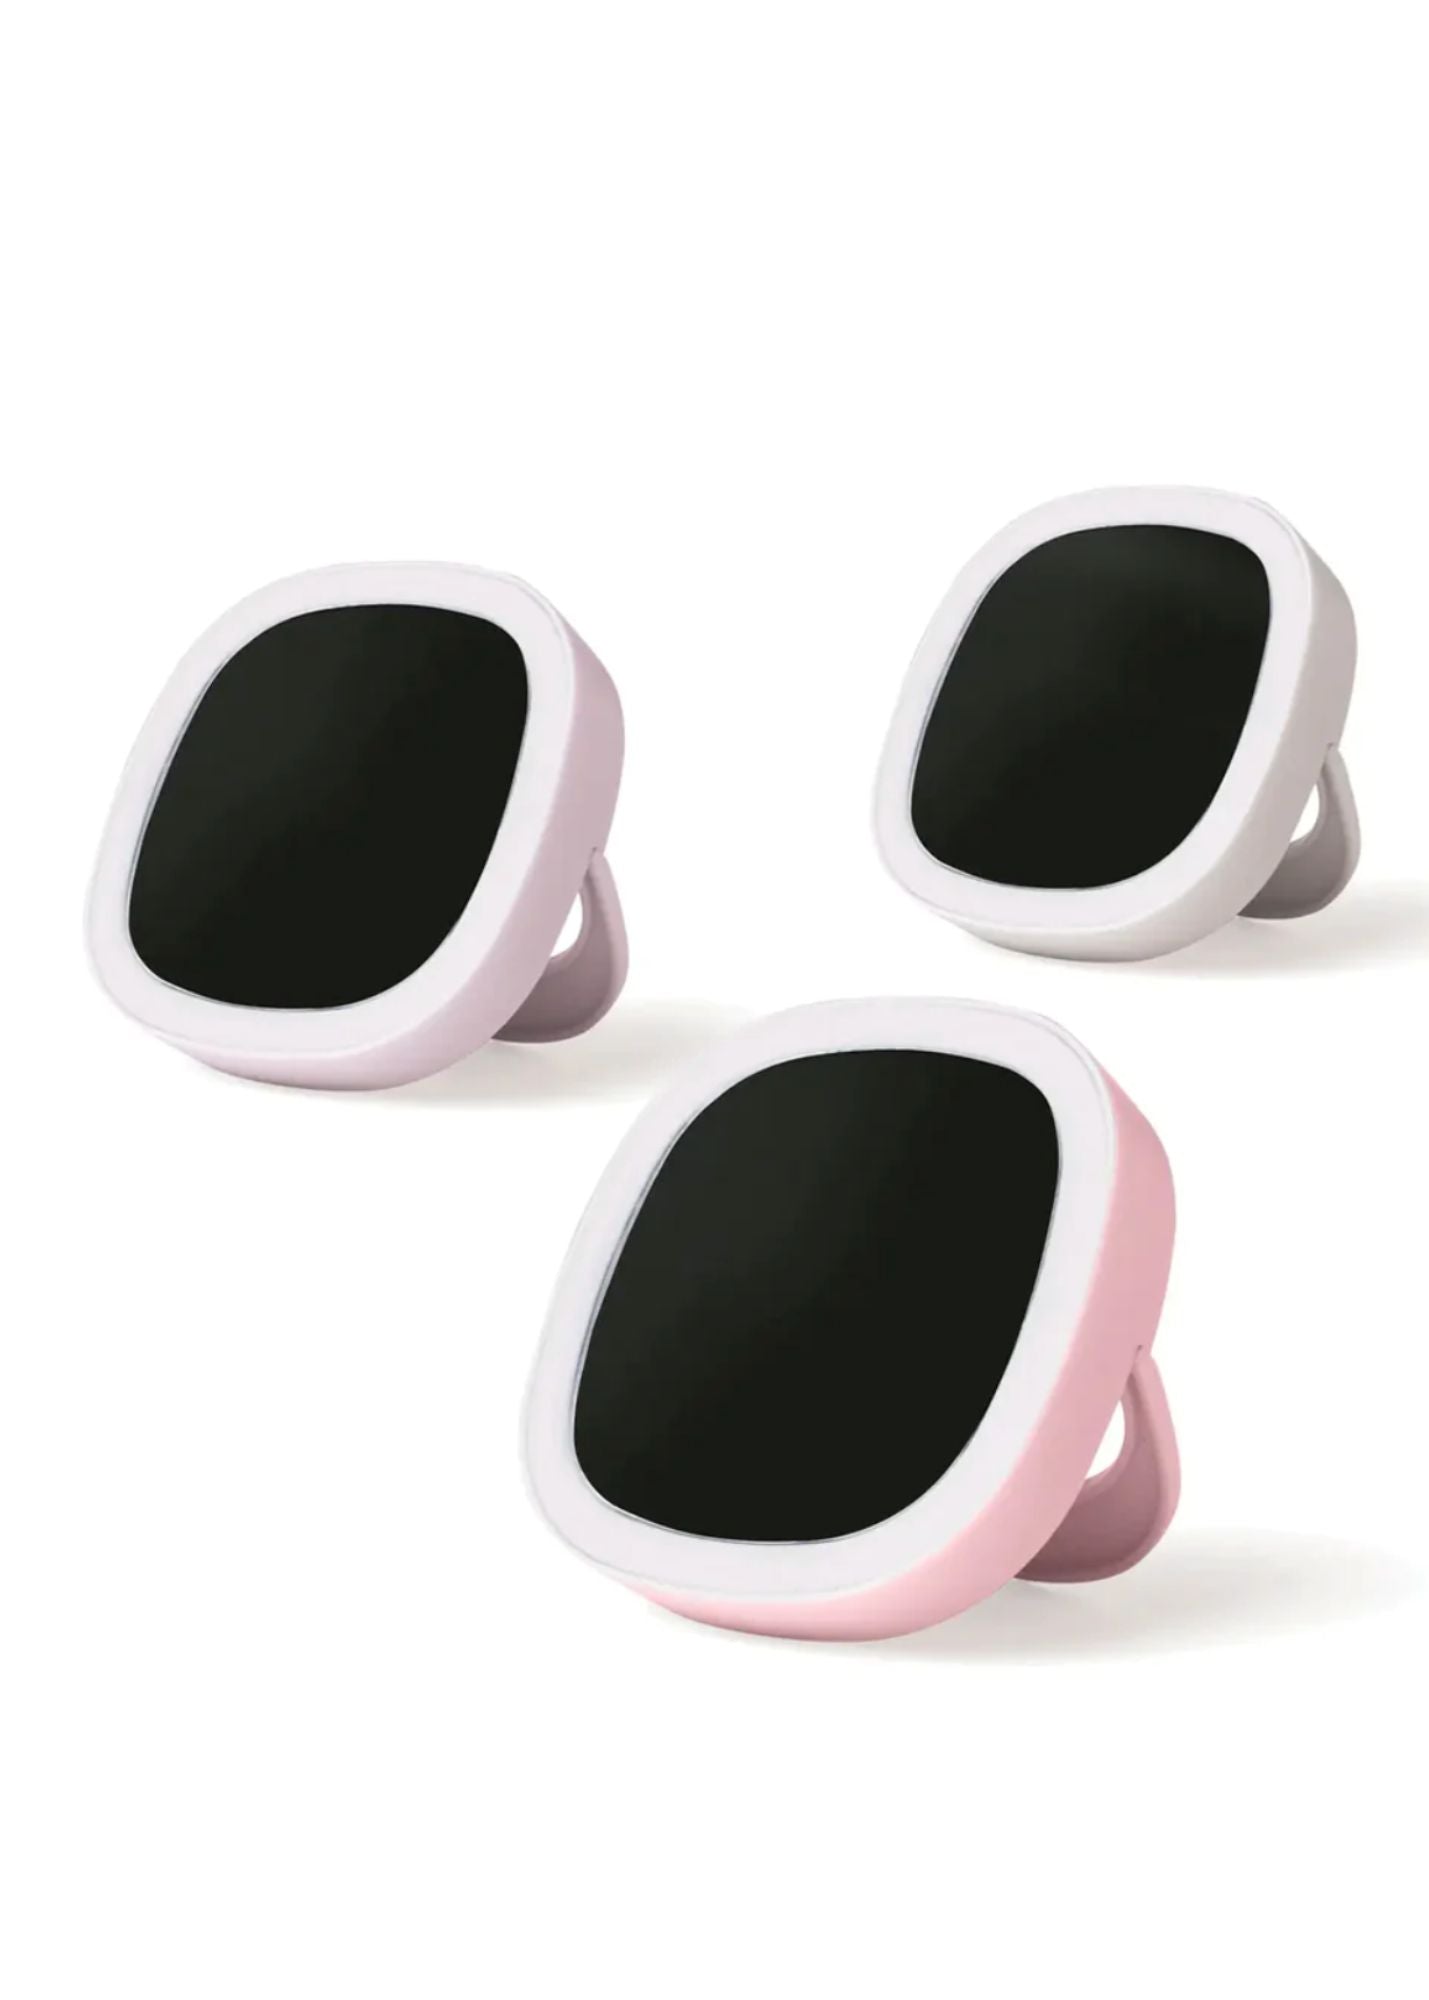 LED Light Up Mini Mirror Gifts Pink